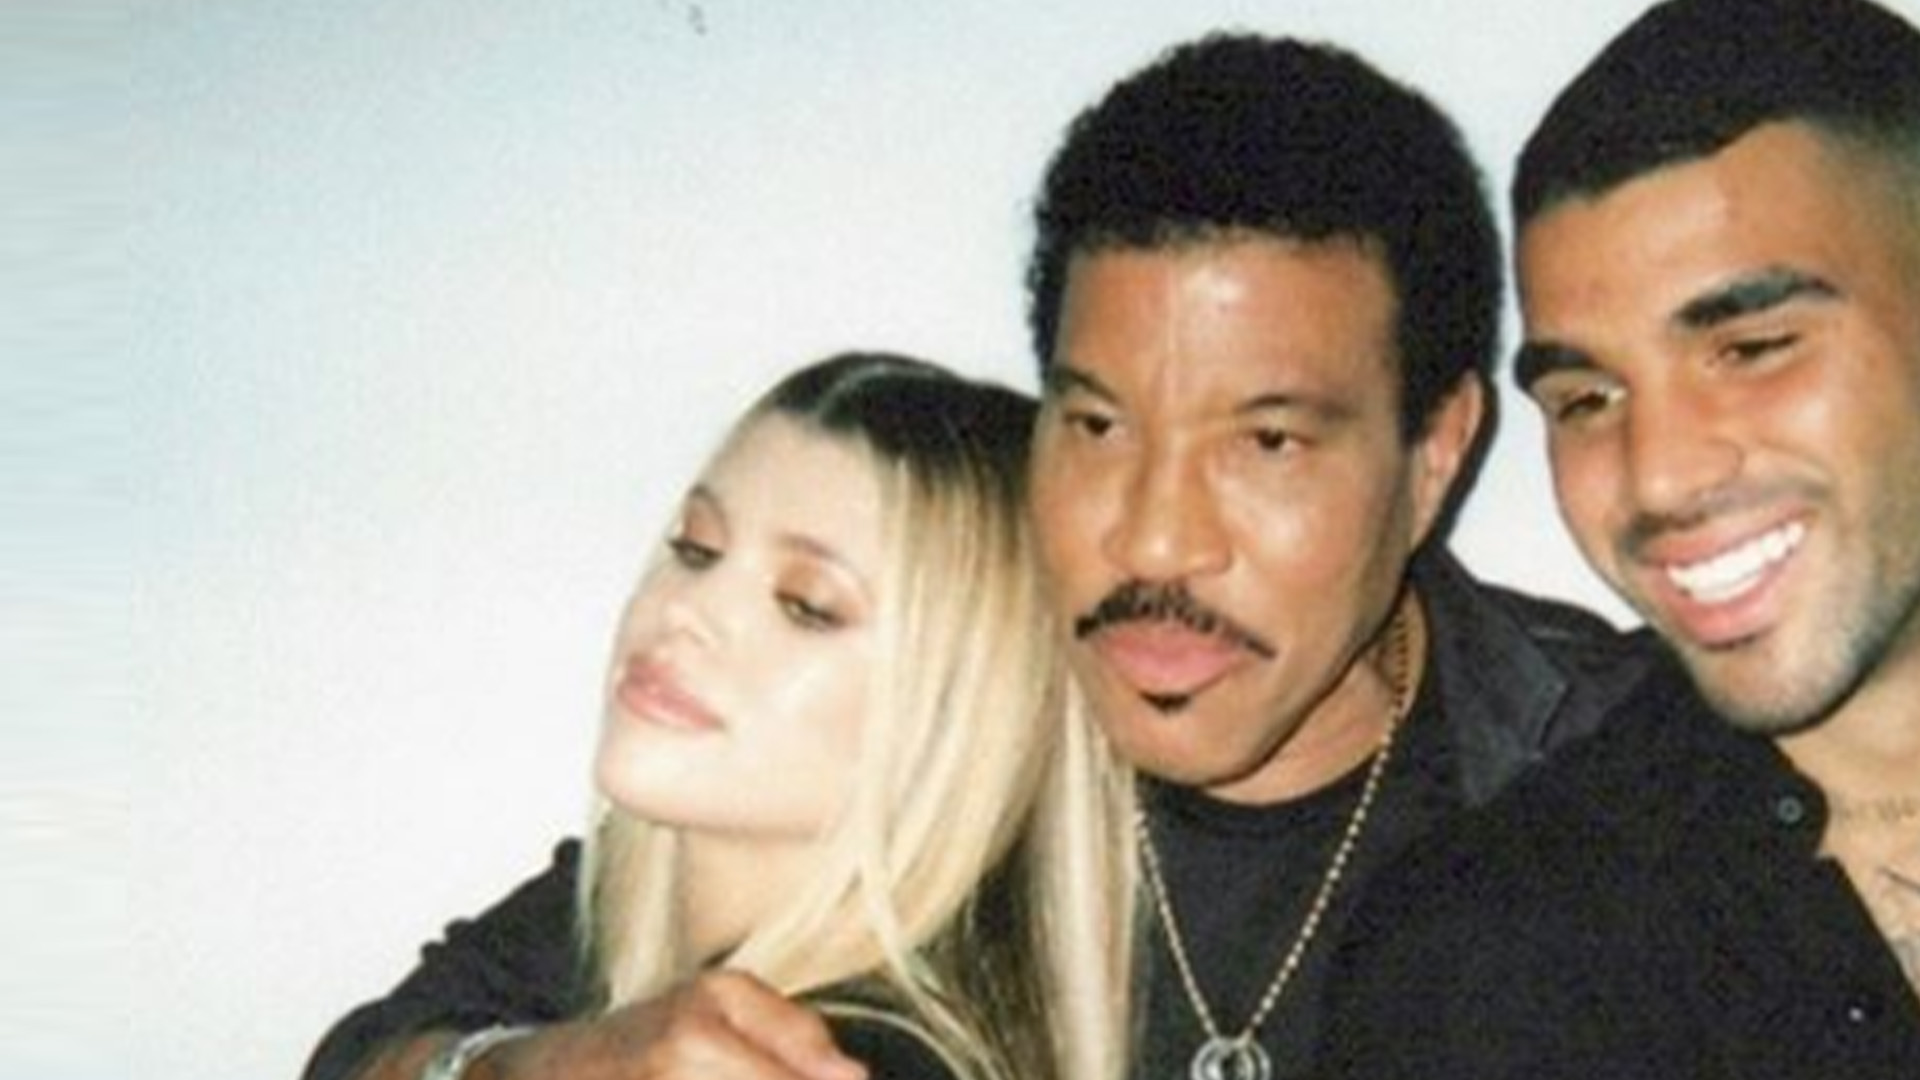 “Lionel Richie Proudly Congratulates Daughter Sofia on Expecting First Child with Millionaire Husband Elliot Grainge” – SEO optimized and catchy title for maximum clicks and higher search ranking.